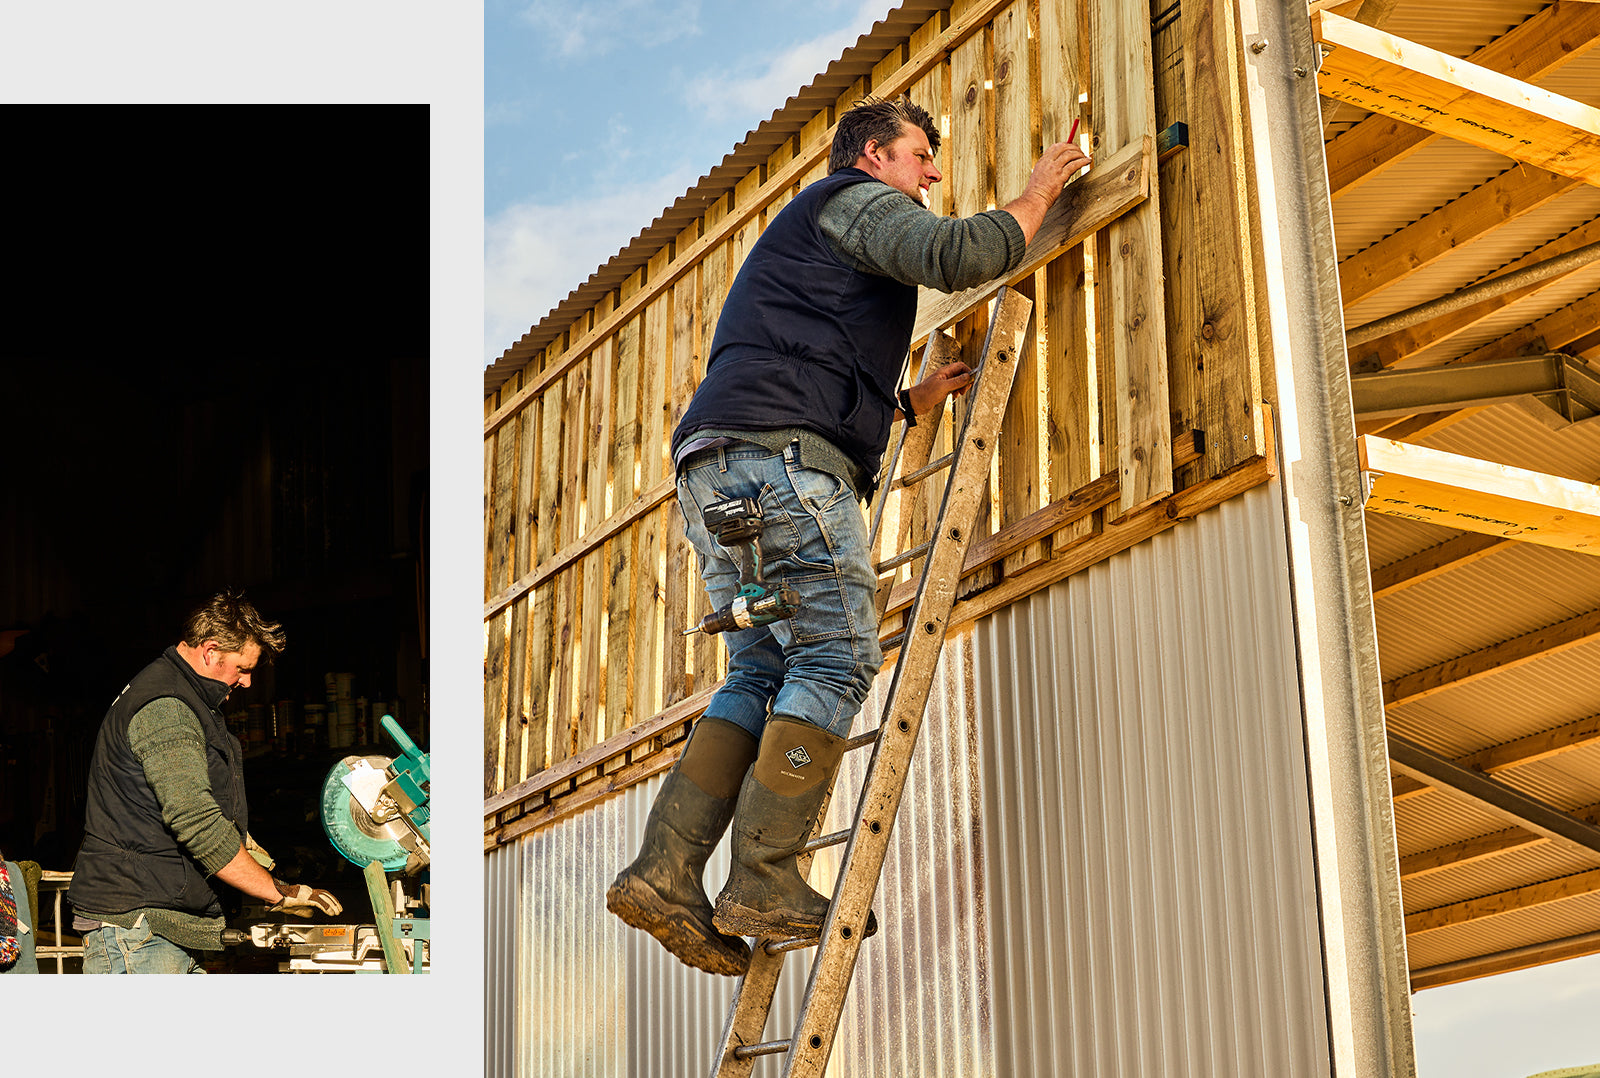 Main image of Colin Macewen wearing a pair of Muck Boots Muckmaster wellingtons, climbing up a ladder to add wooden panels to a farm building. Inset is Colin wearing a black gilet and olive green jumper and gloves, working on a lathe machine 